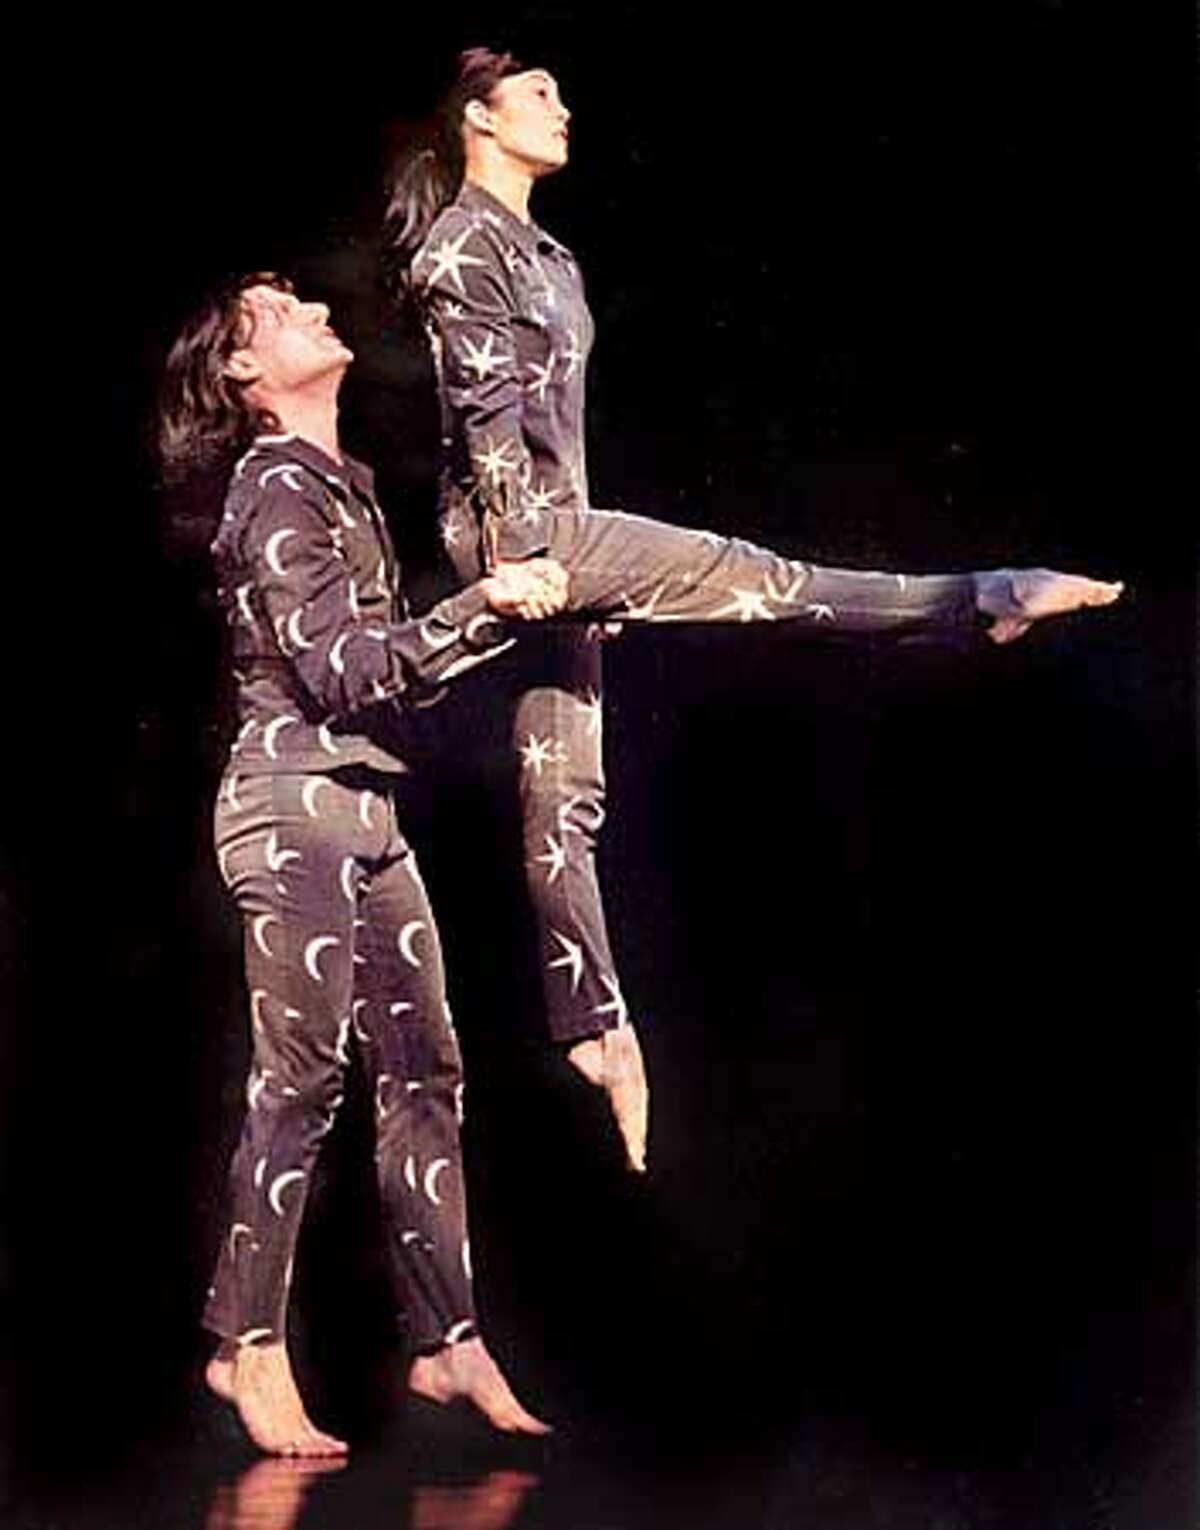 Shawn Gannon and Maile Okamura perfroming in Resurrection, one of 5 repertory works presented by Cal Performances October 3-6, 2002.